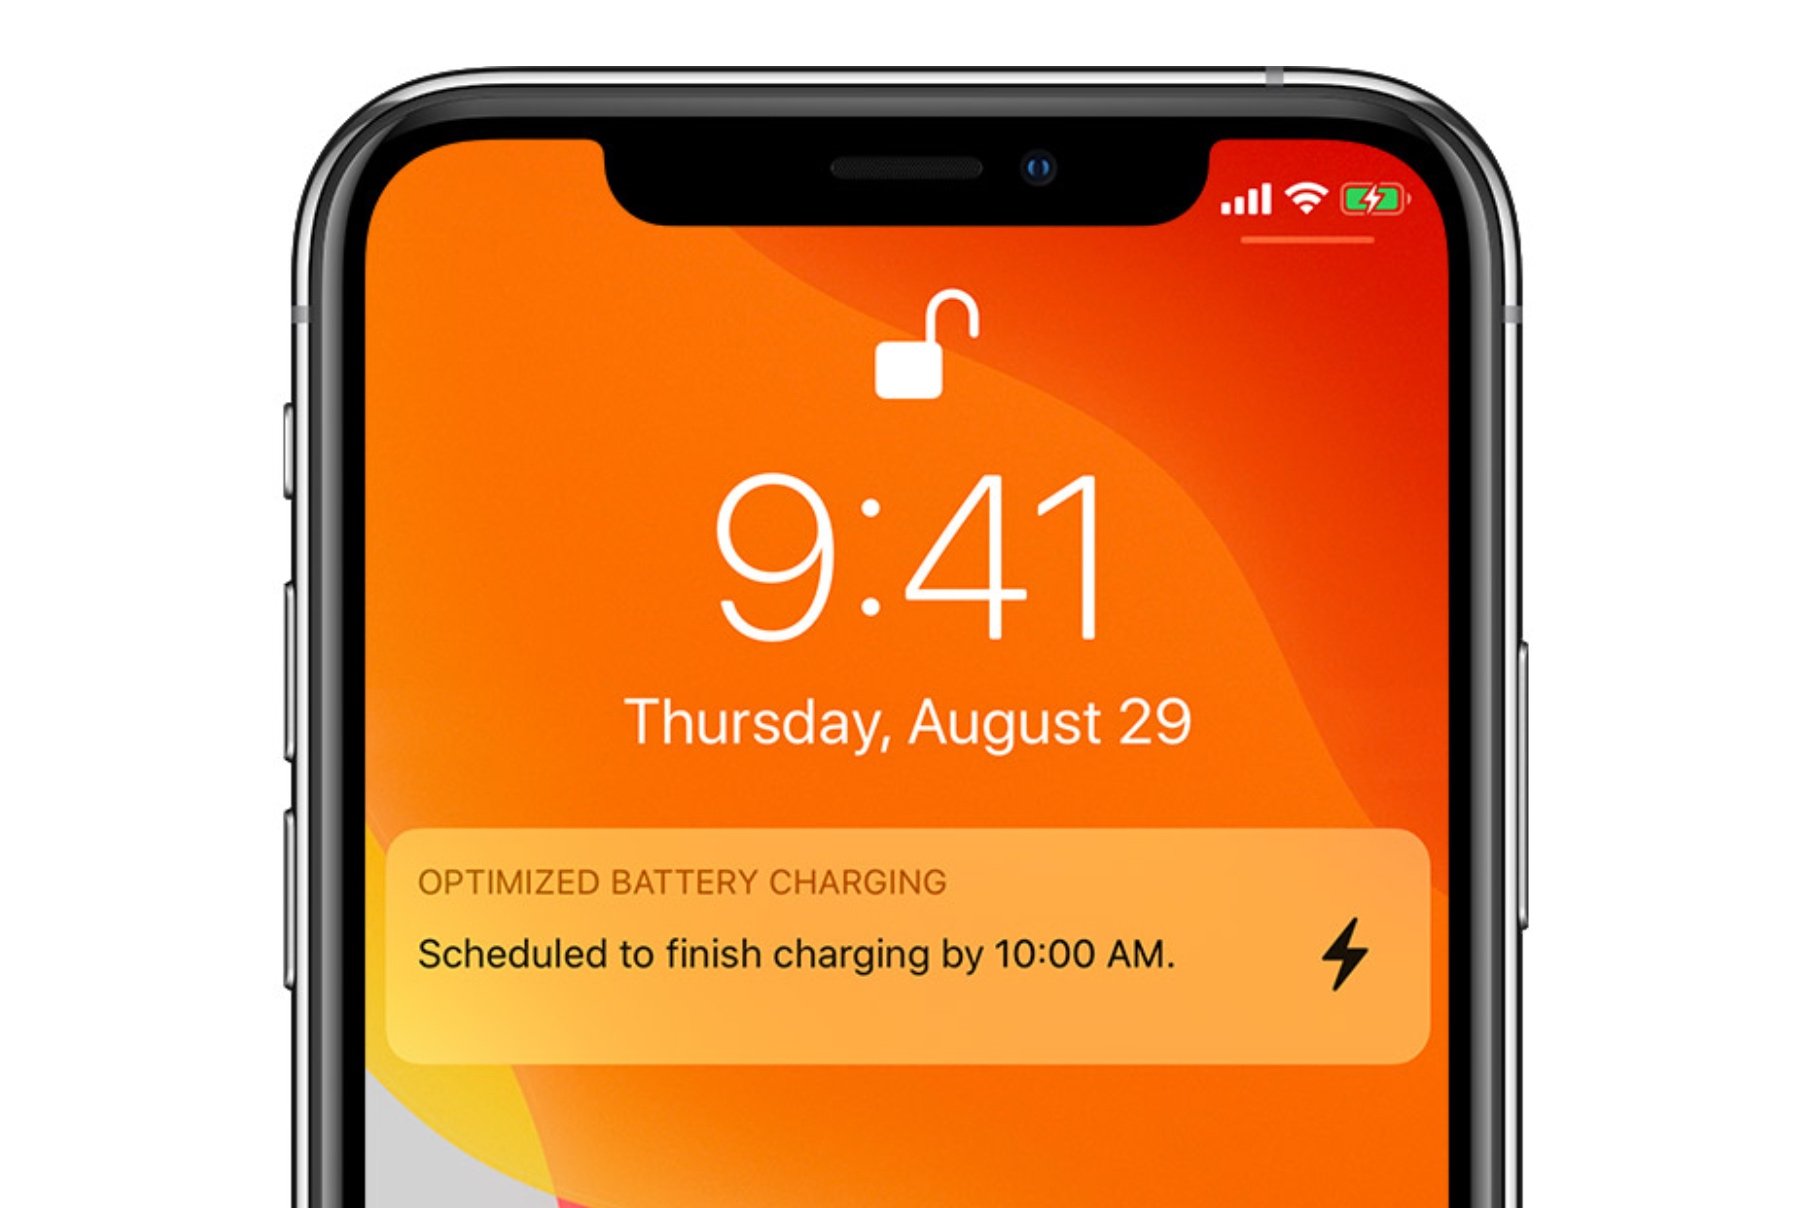 iOS 13 iPhone features: What is Optimized Battery Charging?